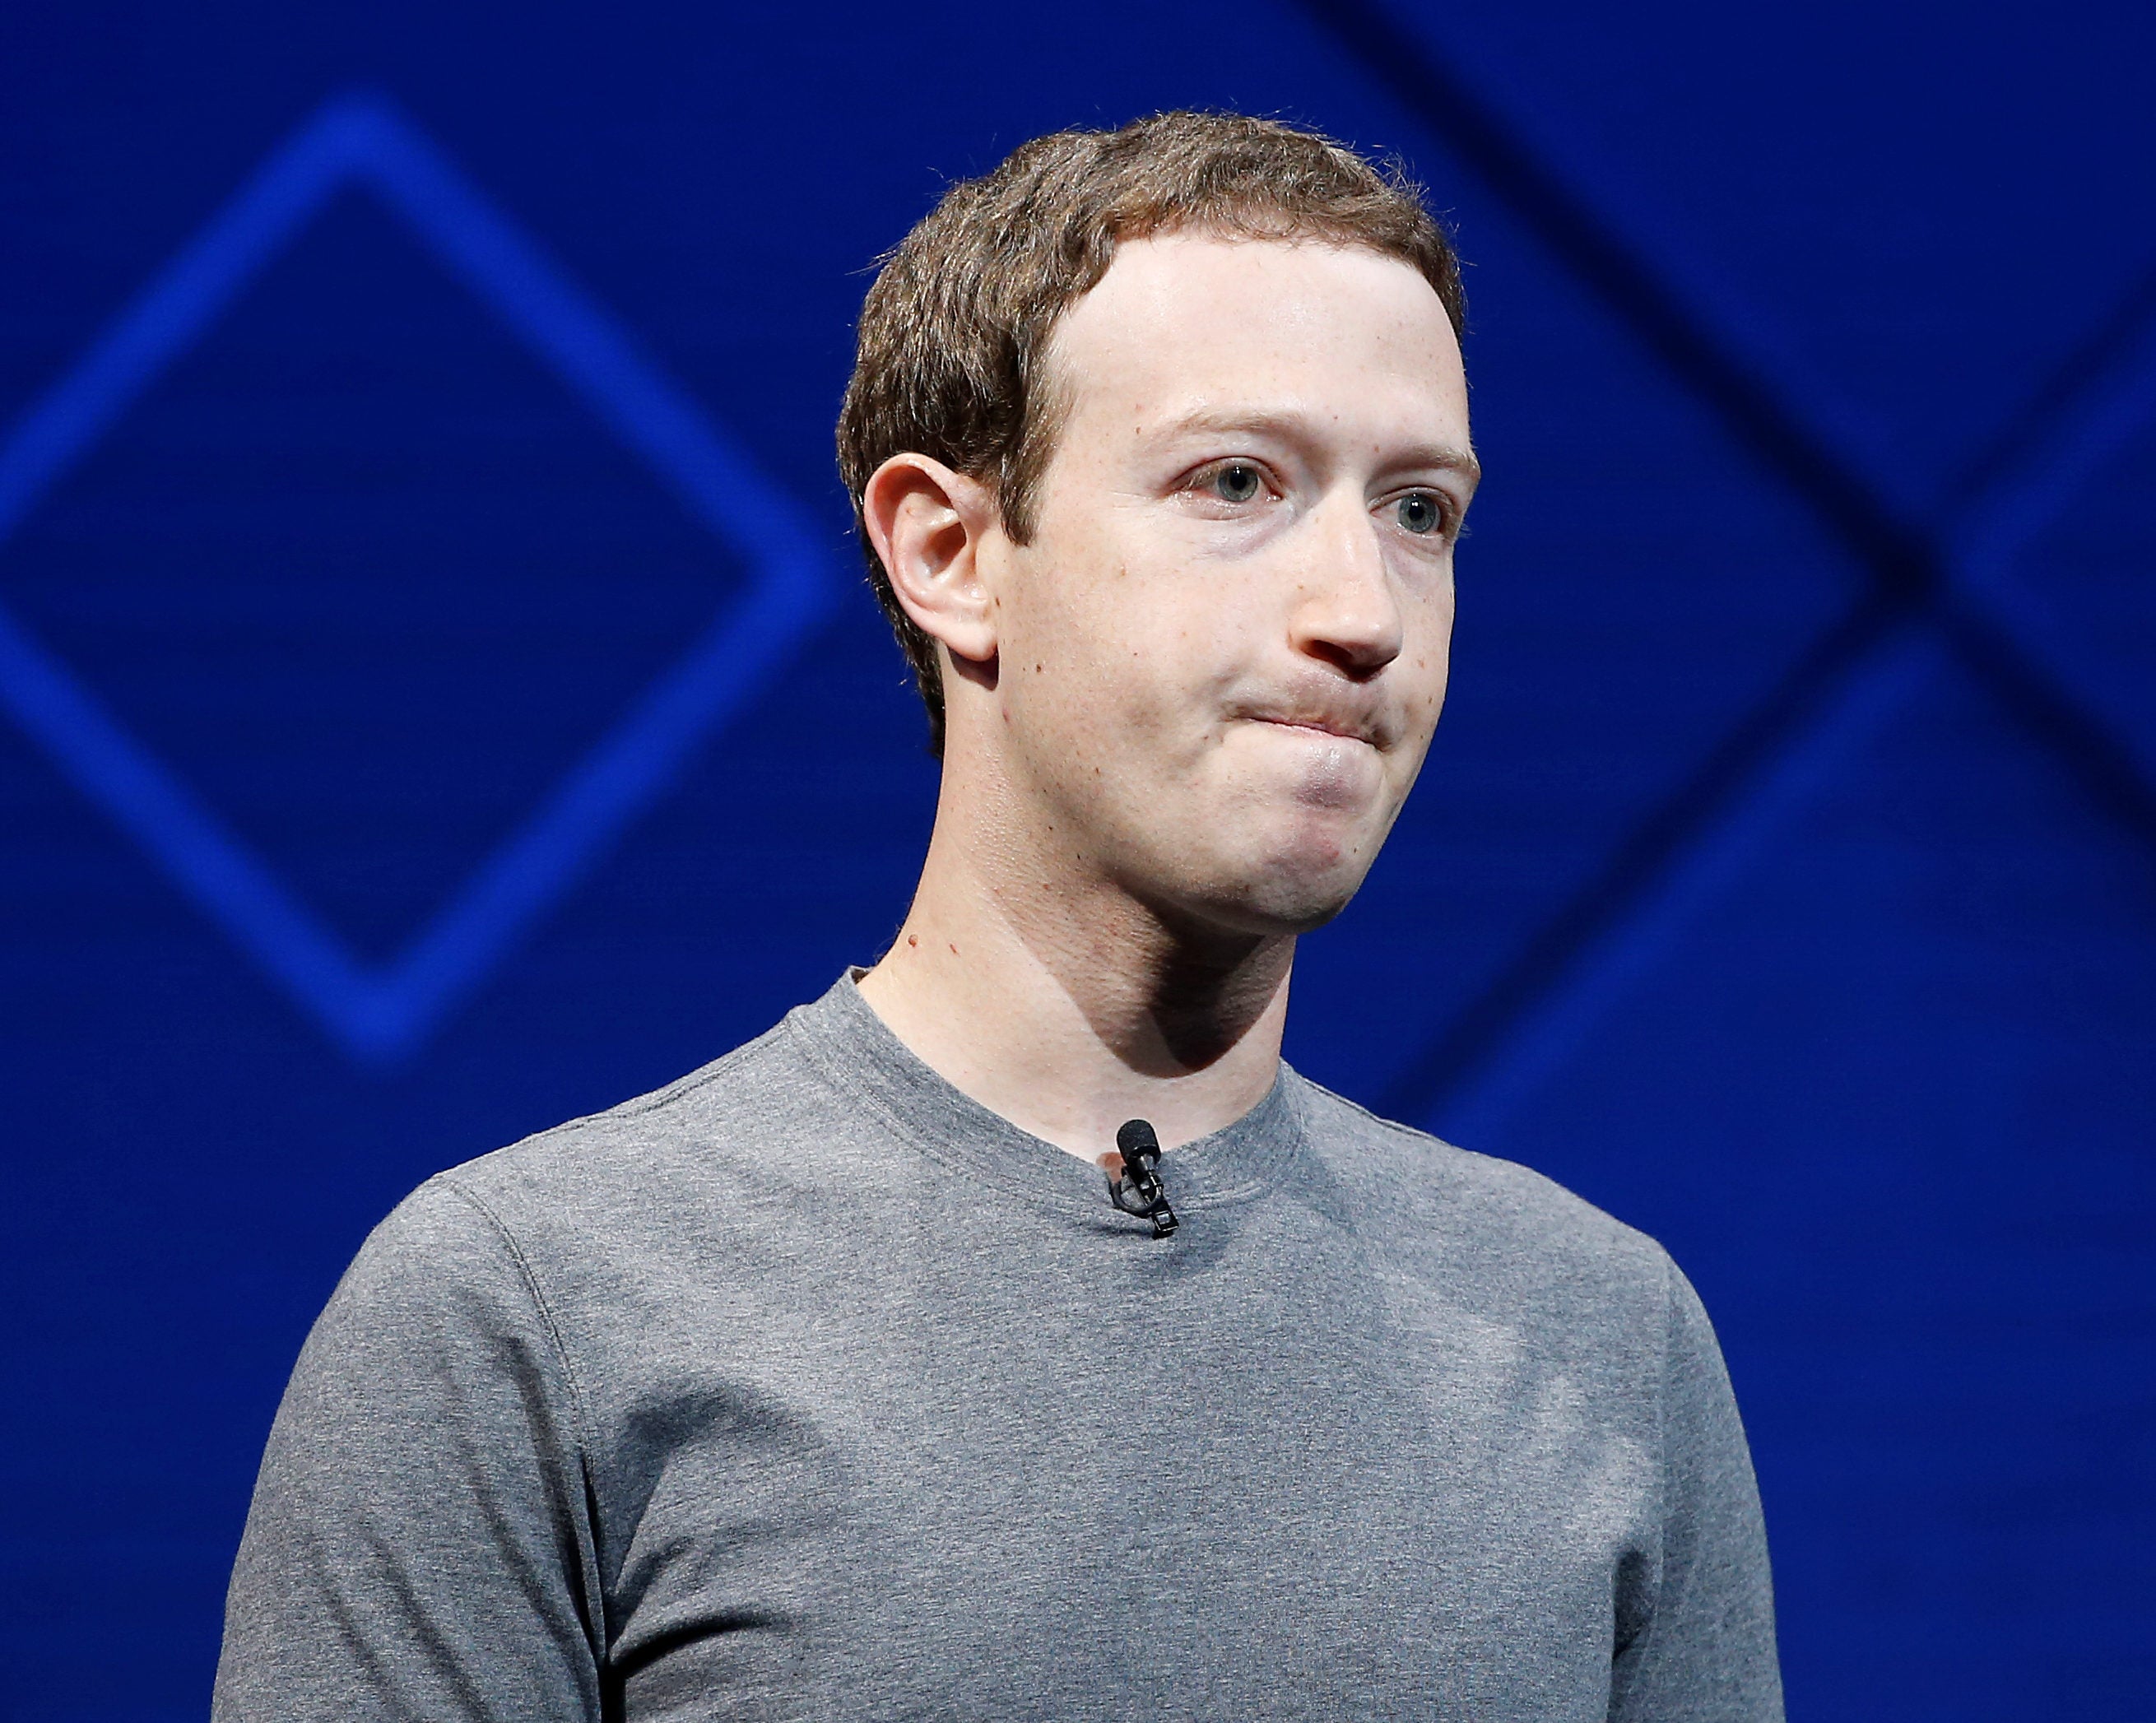 Zuckerberg says he is still right person to lead Facebook amid claims 87m users could be affected by Cambridge Analytica scandal